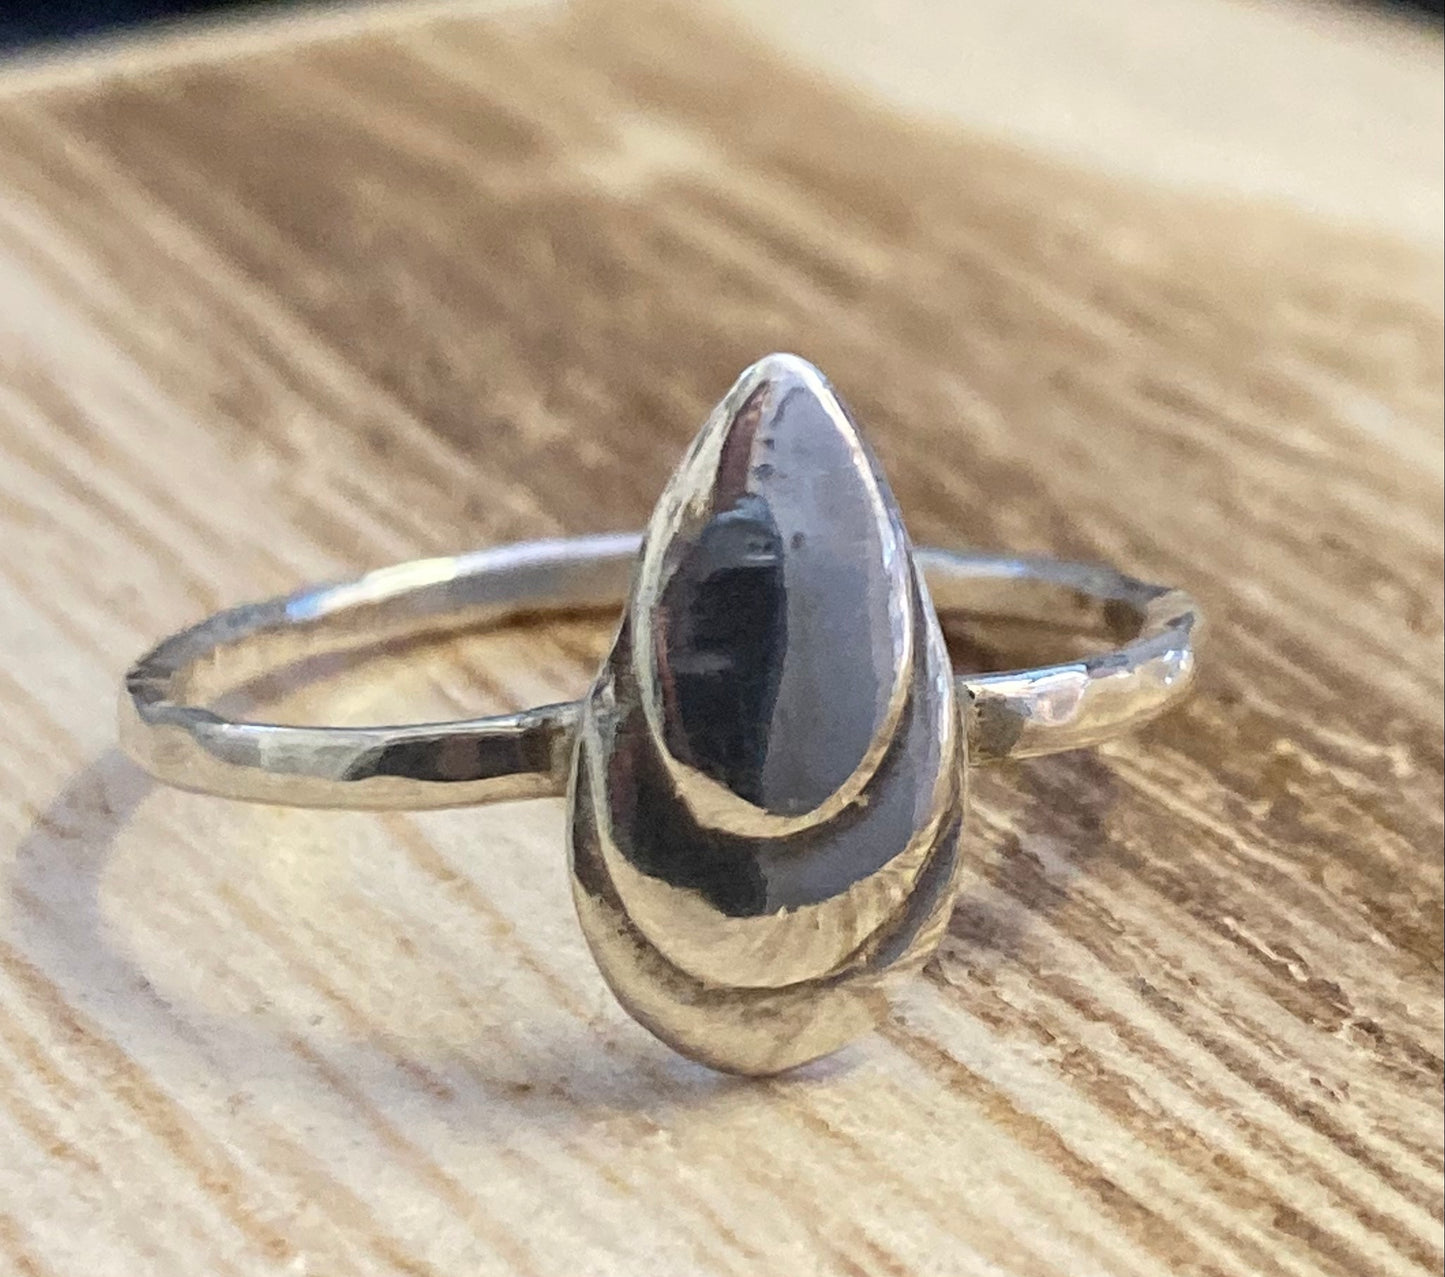 Mussel shell ring